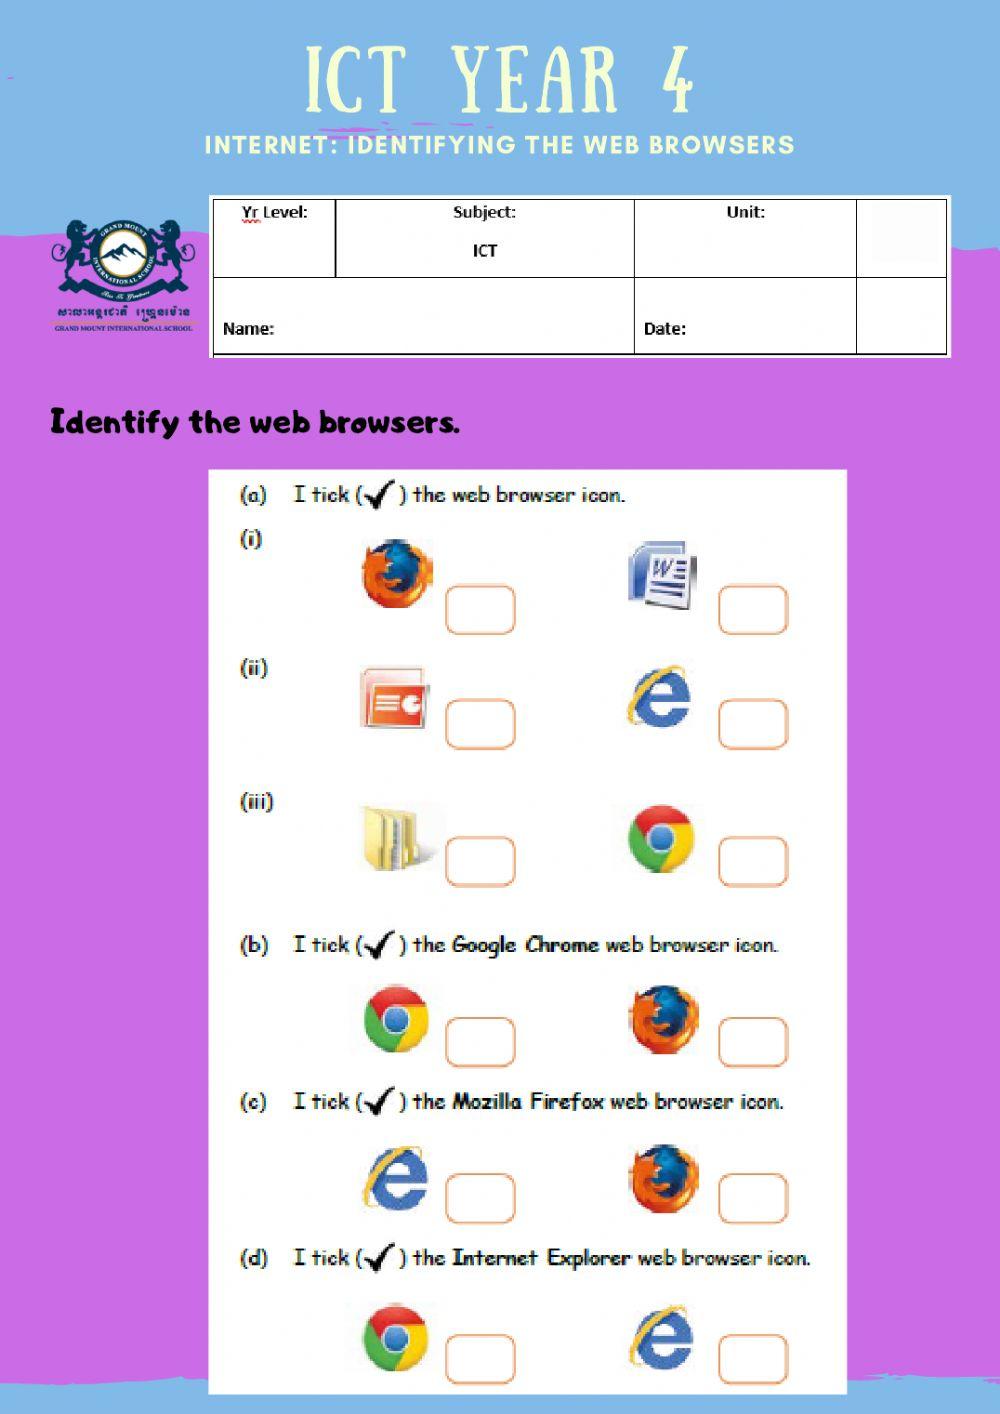 Internet: Identify the web browsers